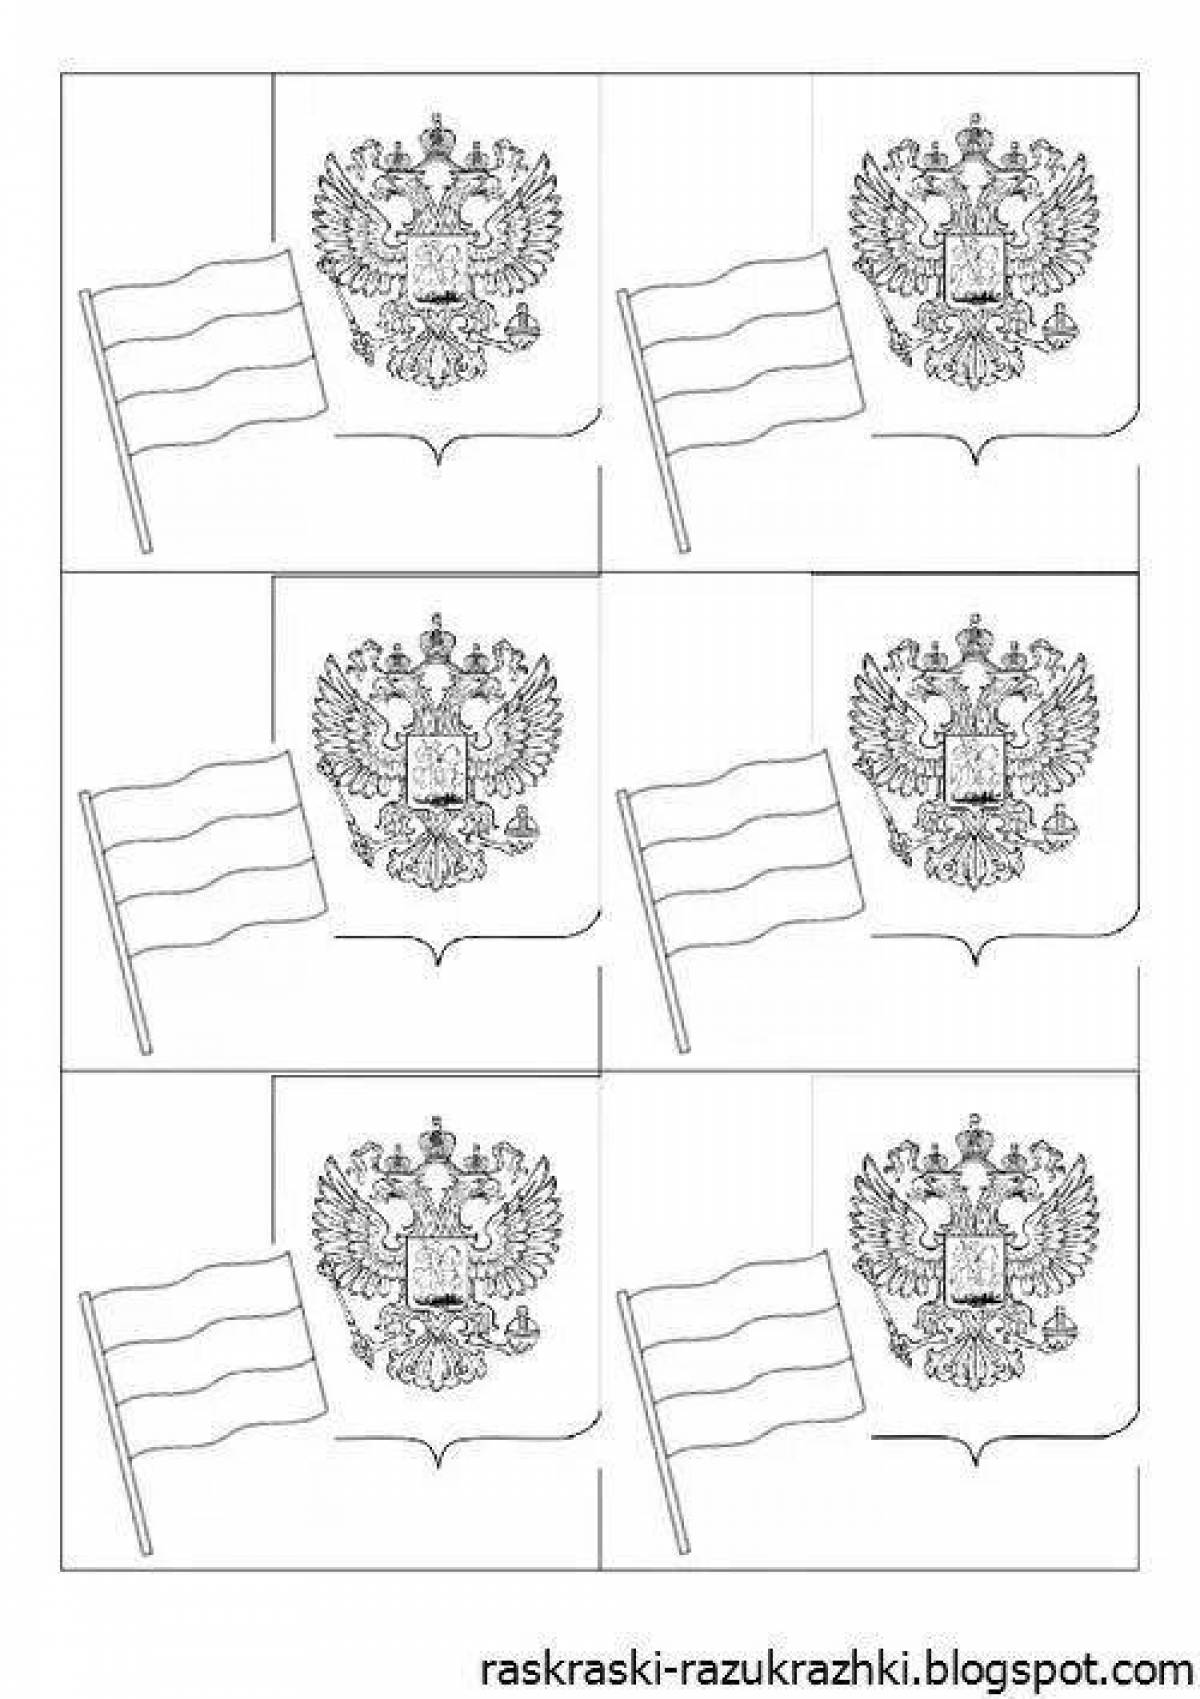 Color-frenzy russian symbols coloring page for juniors